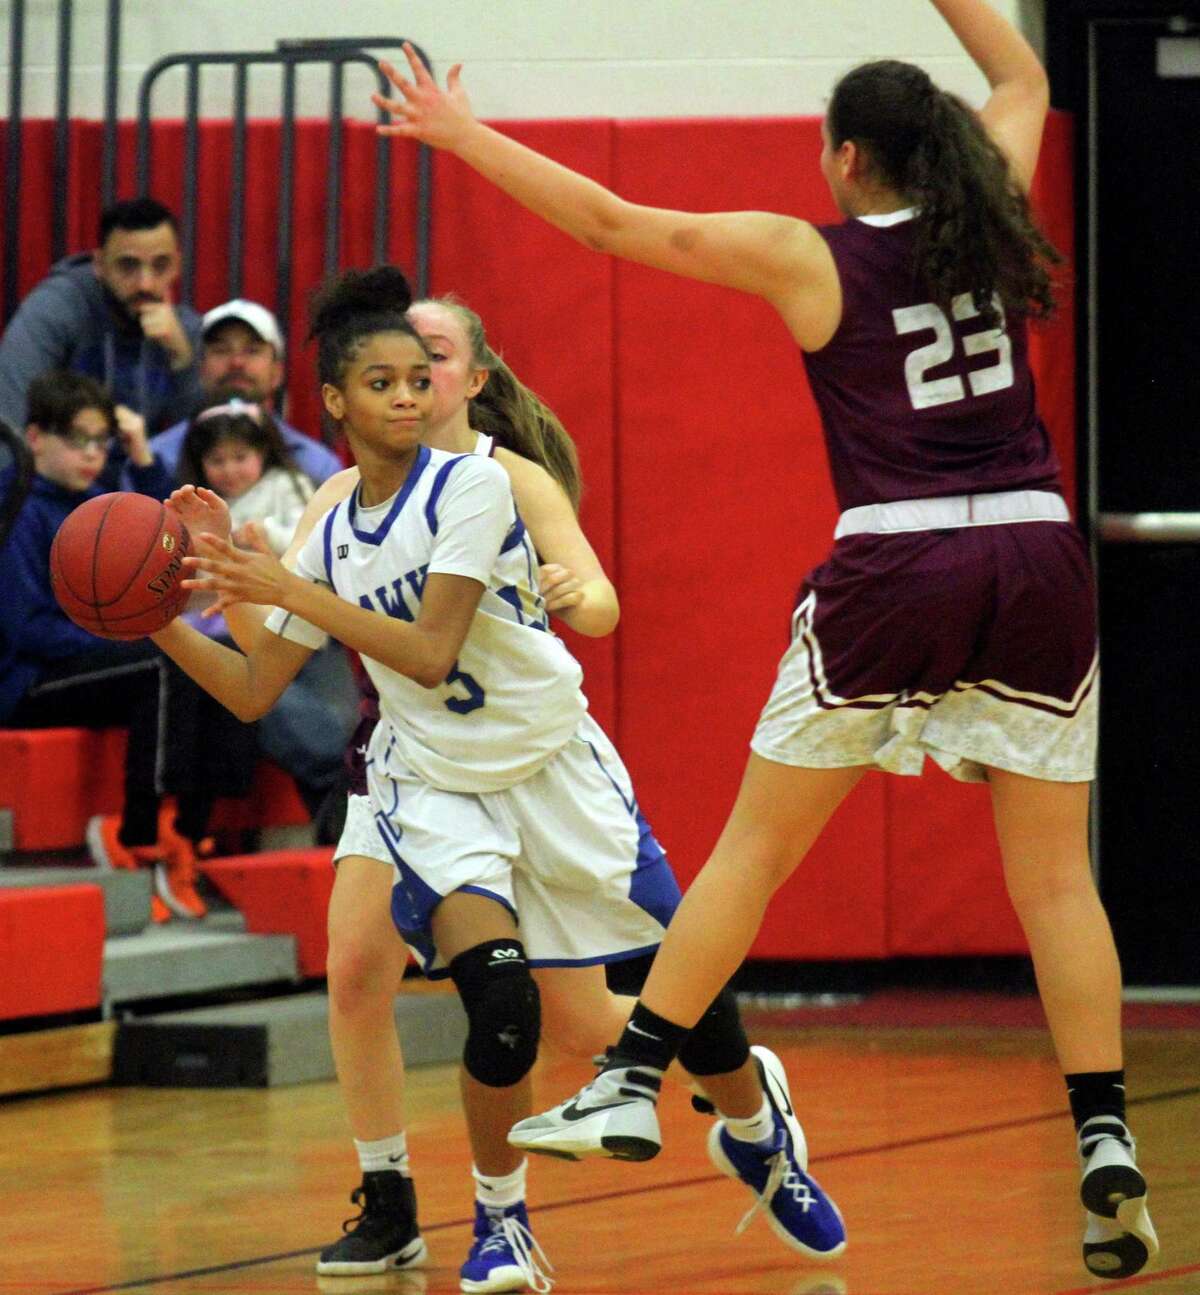 Newtown’s Amy Sapenter looks to pass the ball as Bethel’s Gabriella Mendonca defends in February.